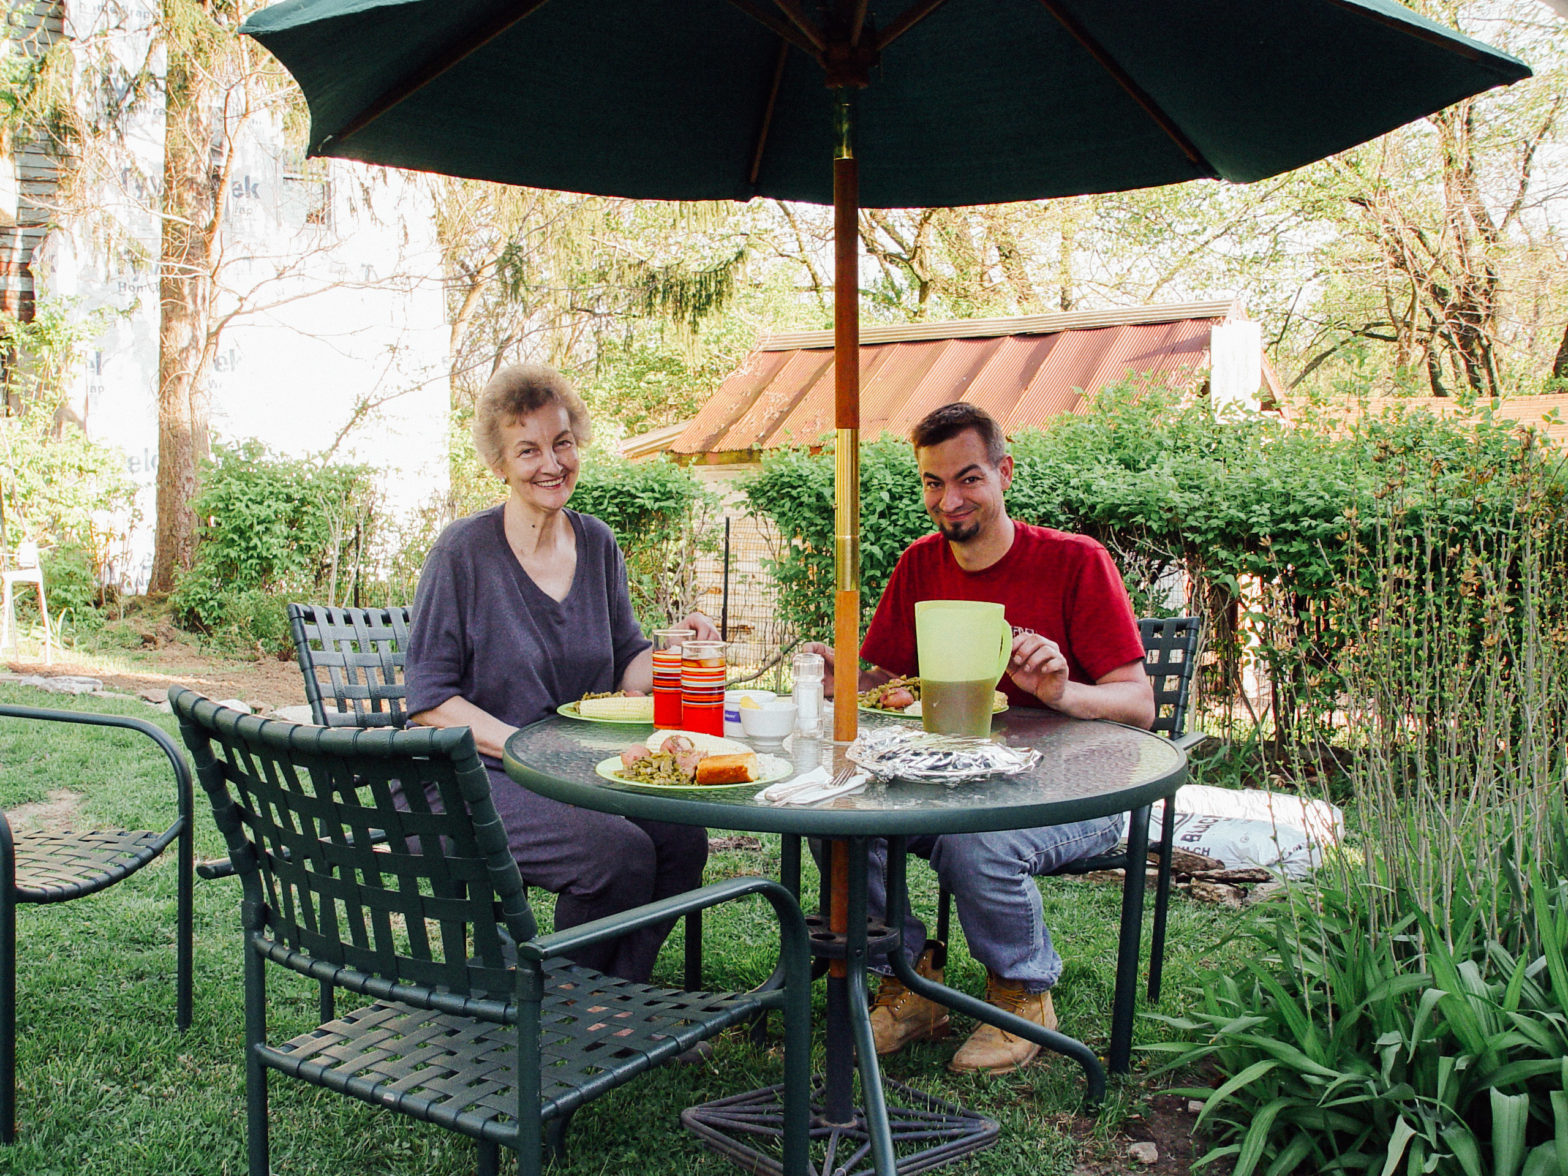 A mother and son sit at a table in a garden